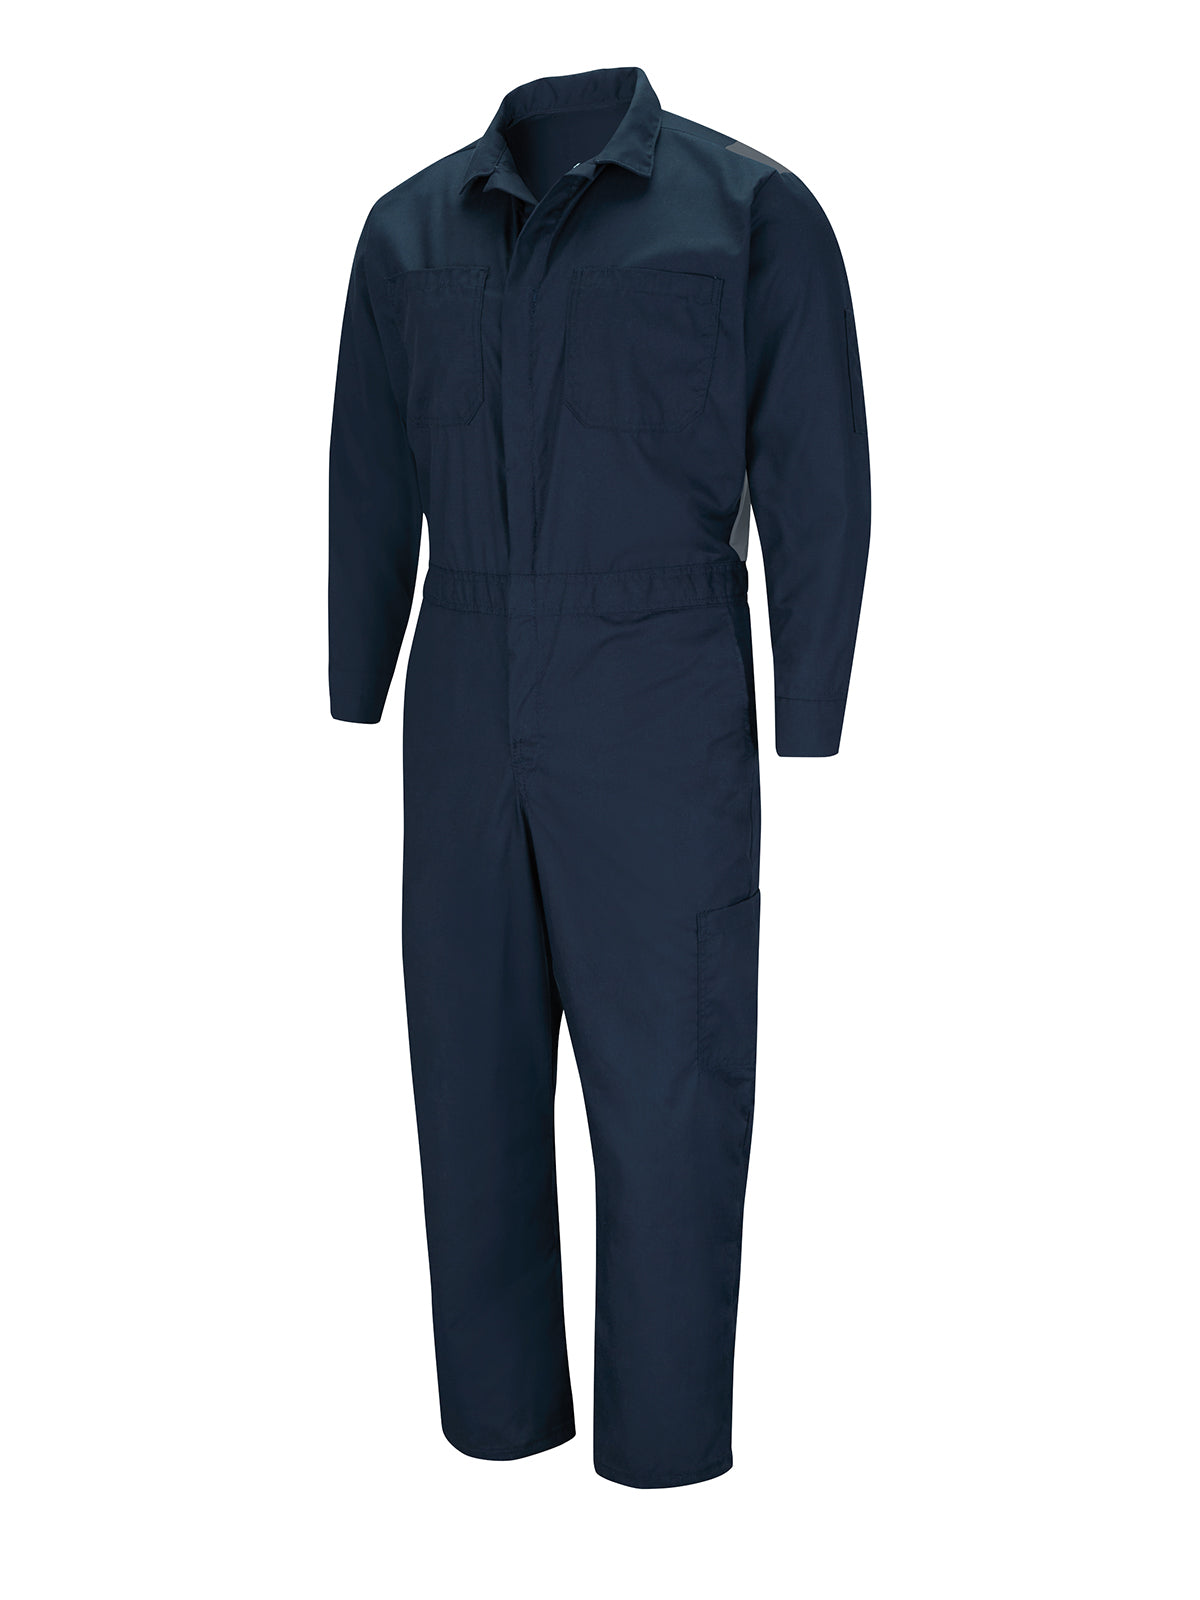 Unisex Performance Plus Lightweight Coverall with OilBlok Technology